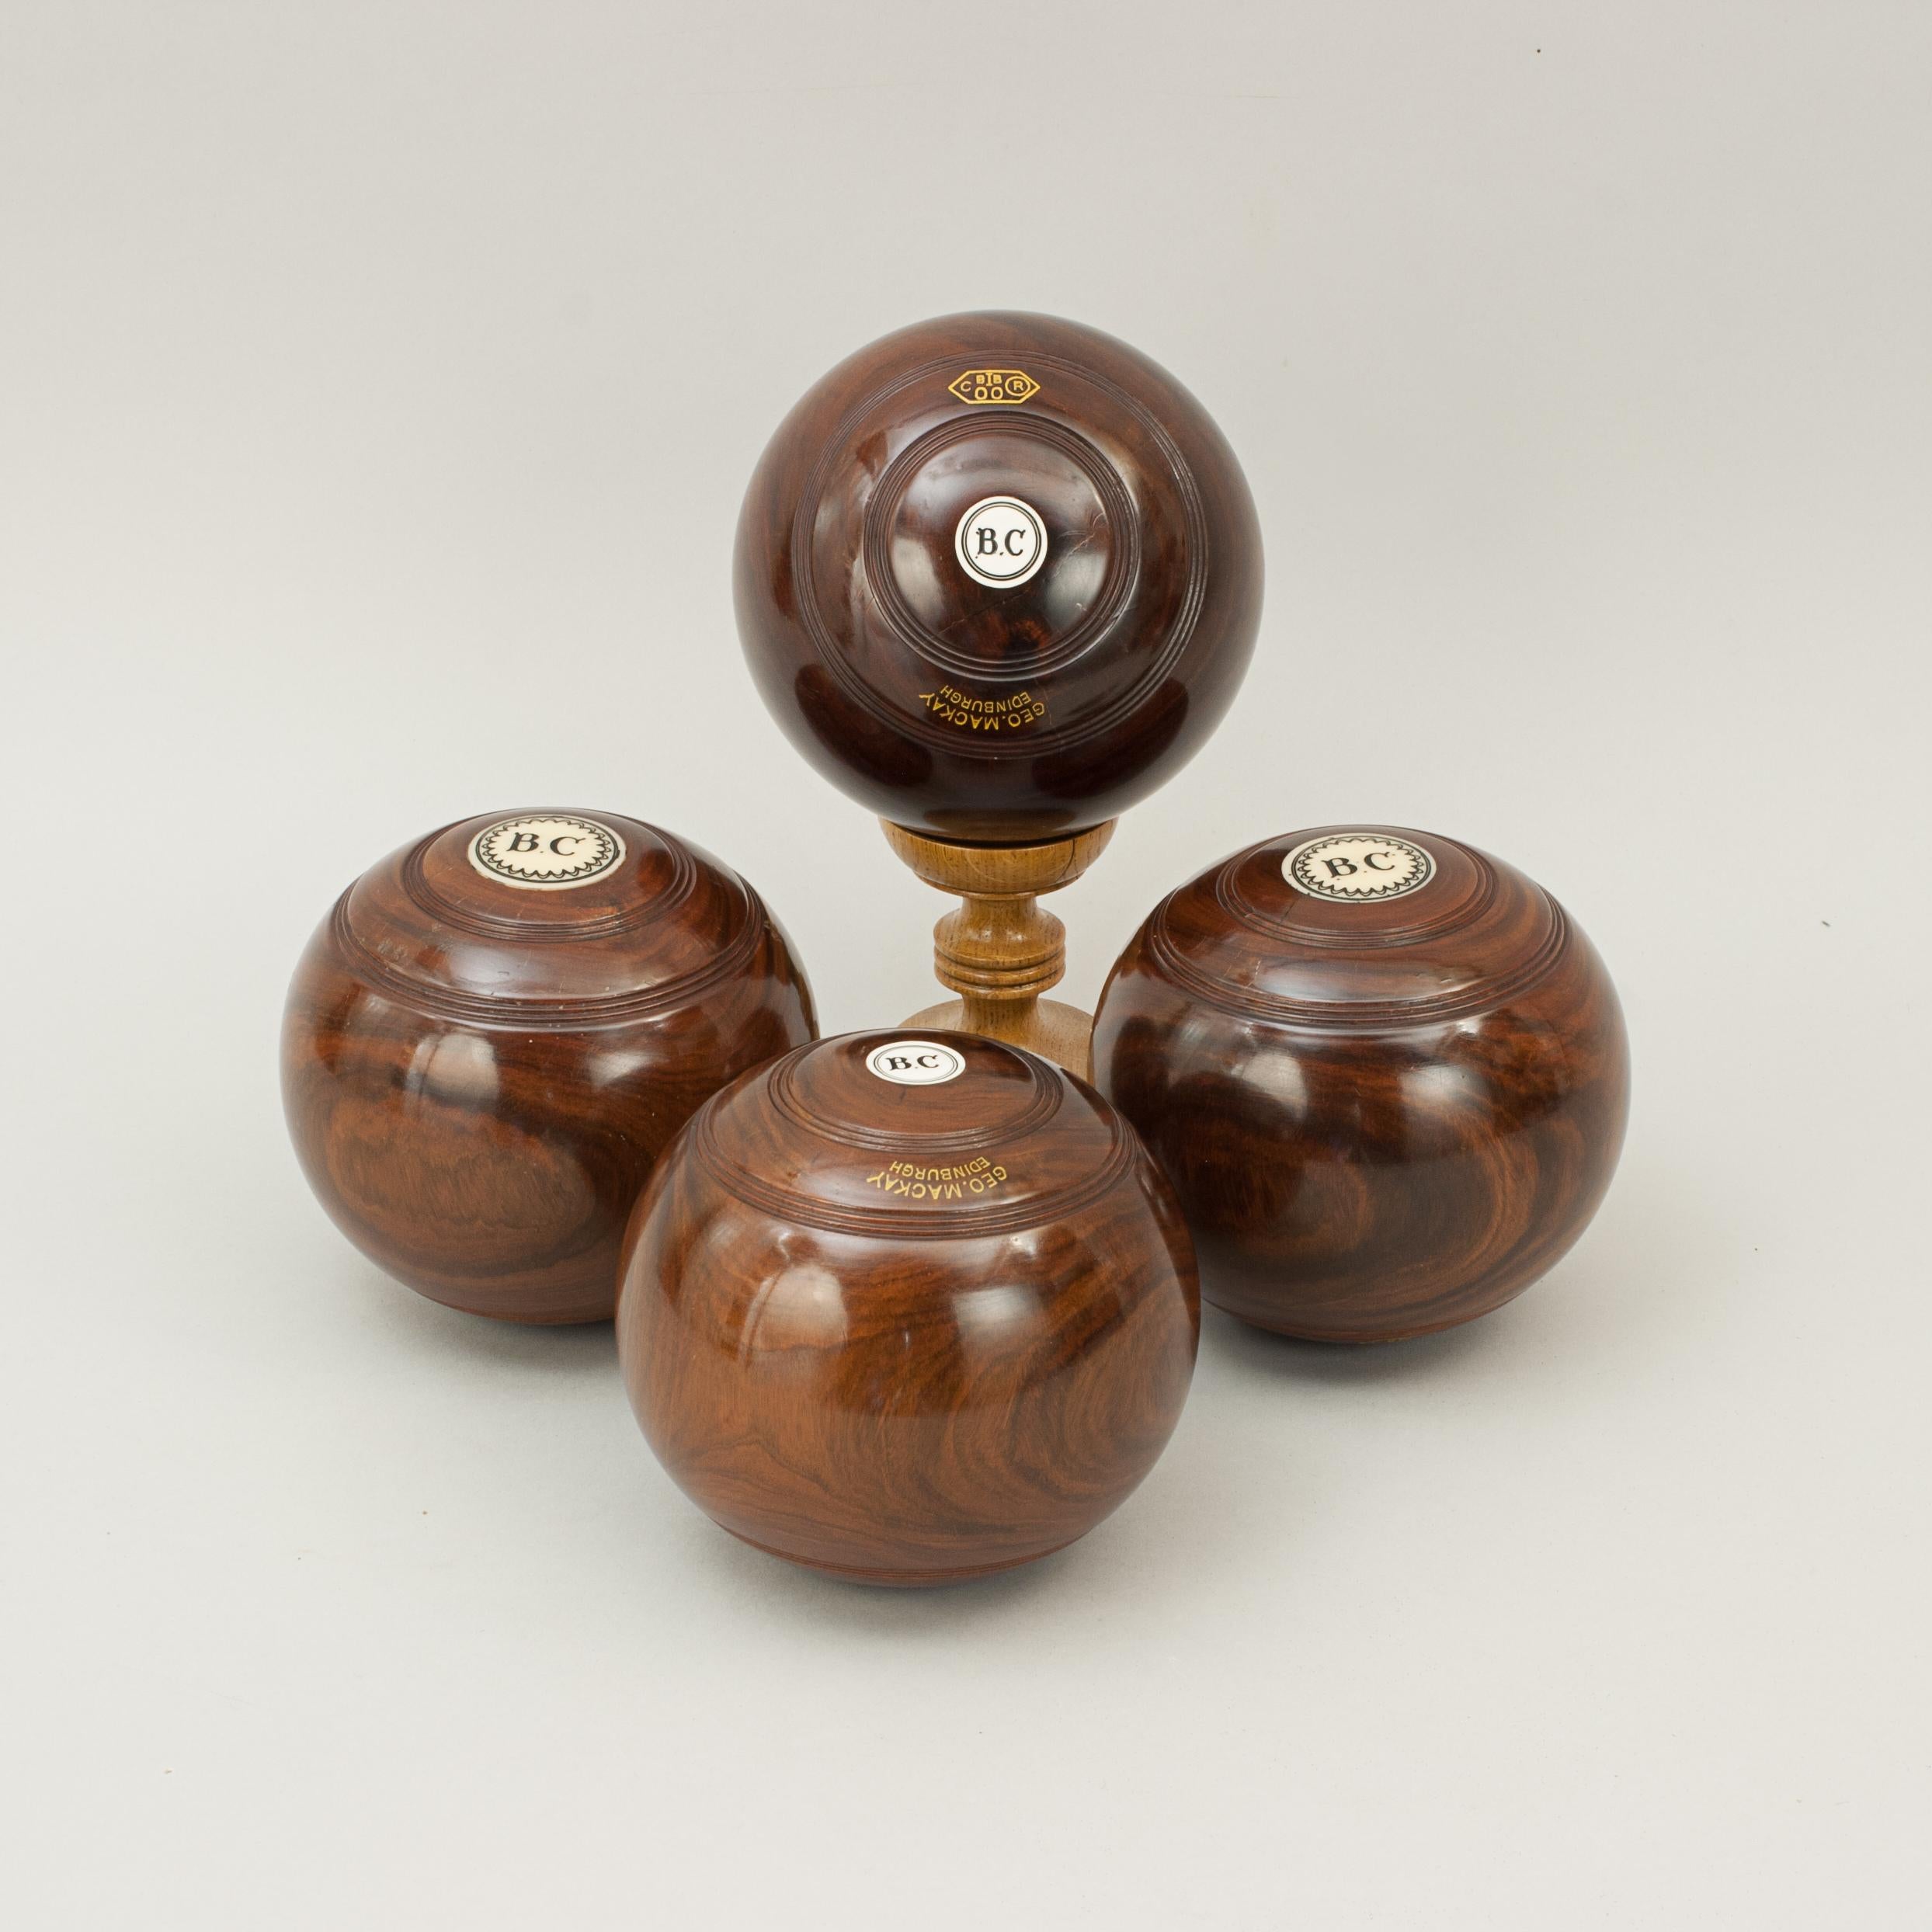 Lawn bowls, George Mackay, Edinburgh.
A set of four lignum vitae lawn bowls by 'George Mackay, Blackfriars Street, Edinburgh'. The bowls have discs on both ends with initials 'B.C'. The bowls are stamped in gilt writing 'Geo.Mackay' with the